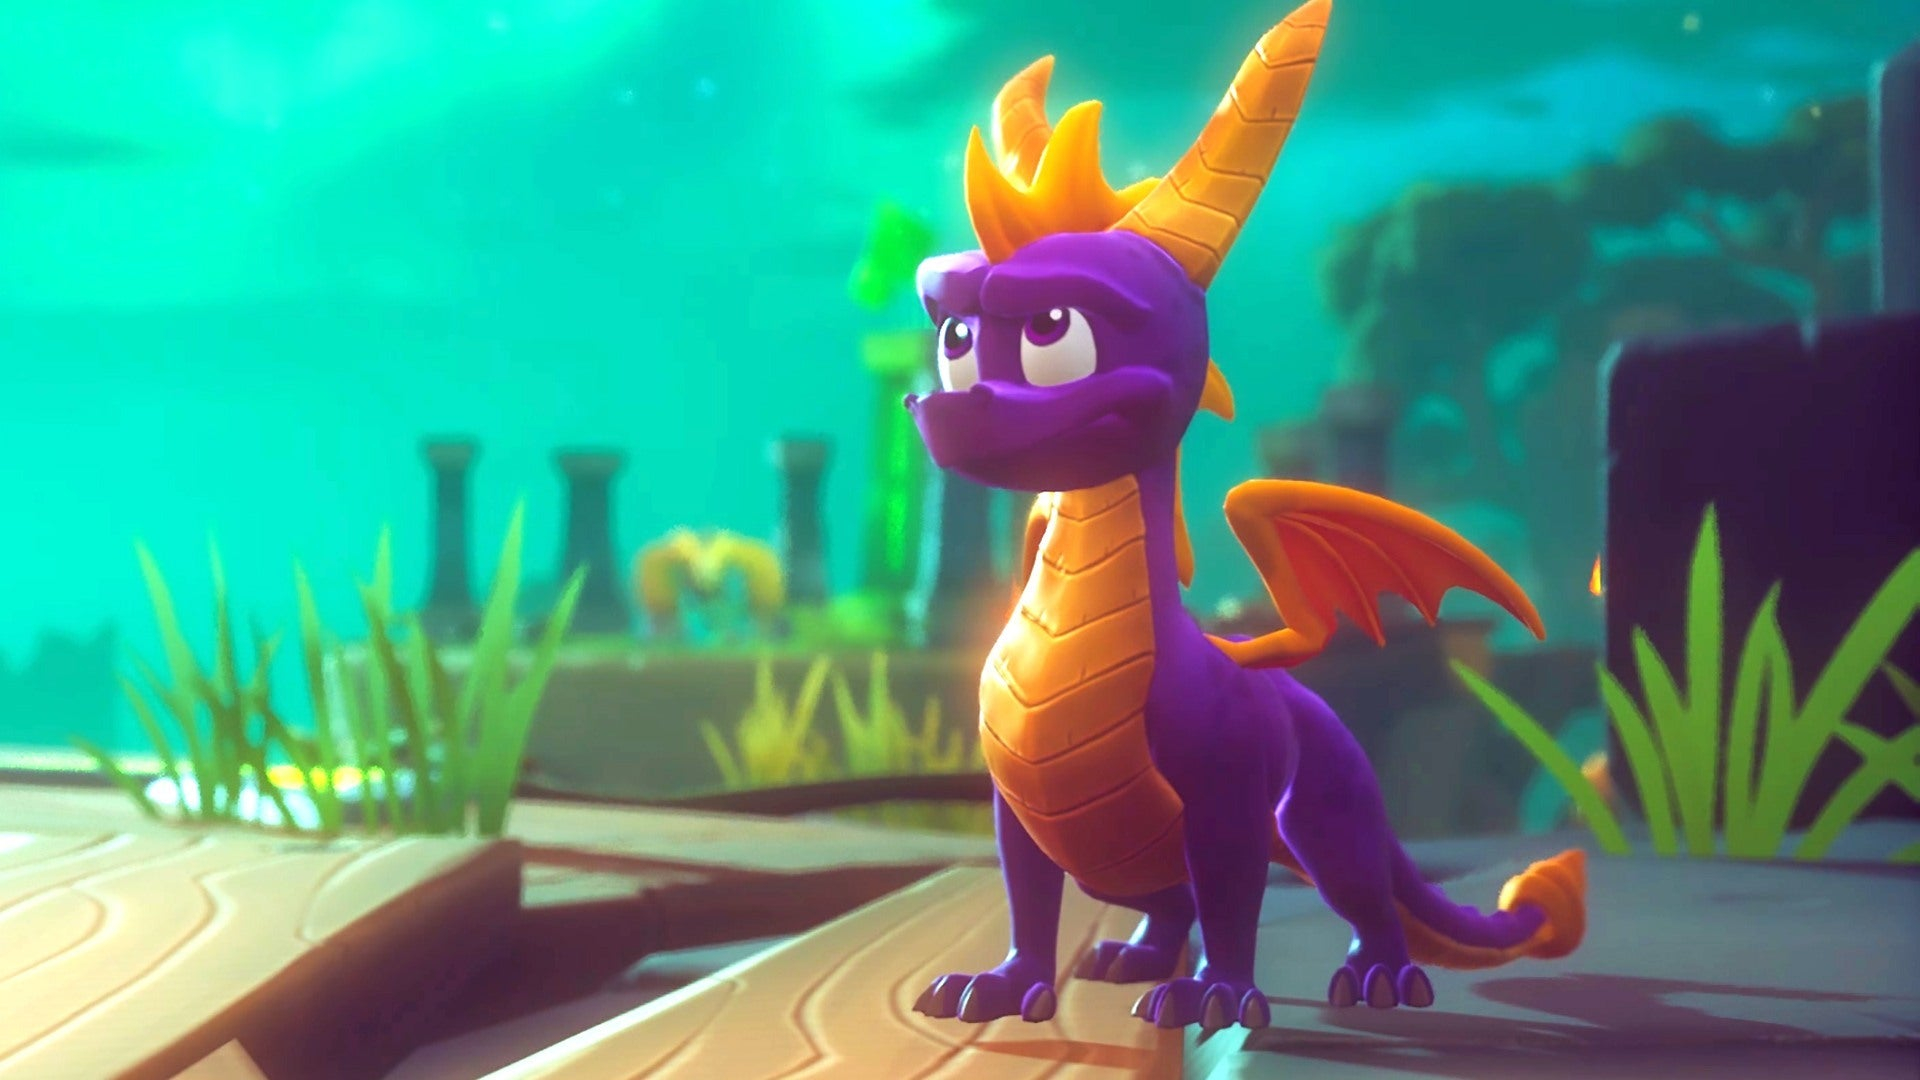 1920x1080 6 Minutes of Spyro Reignited Trilogy Gameplay E3 2018 IGN